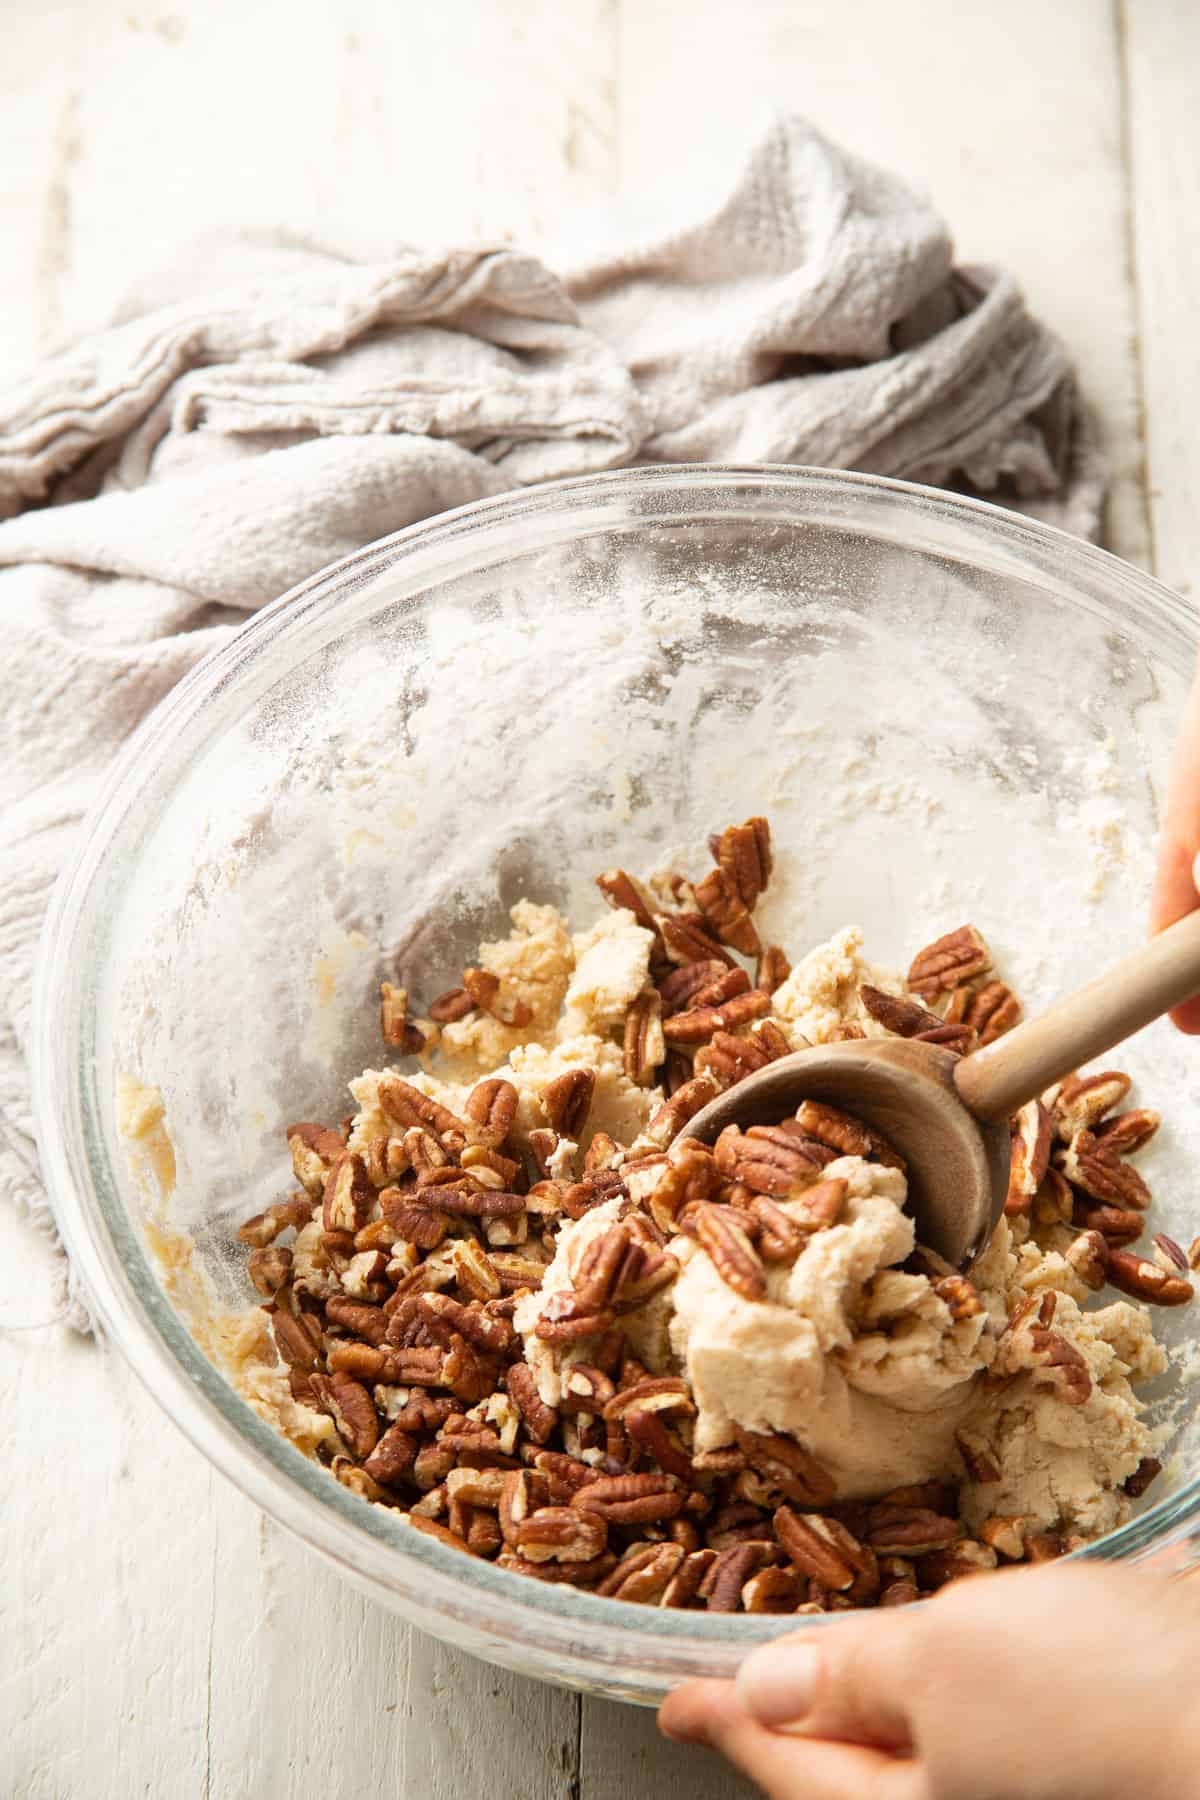 Hand stirring pecans into cookie dough in a glass bowl.